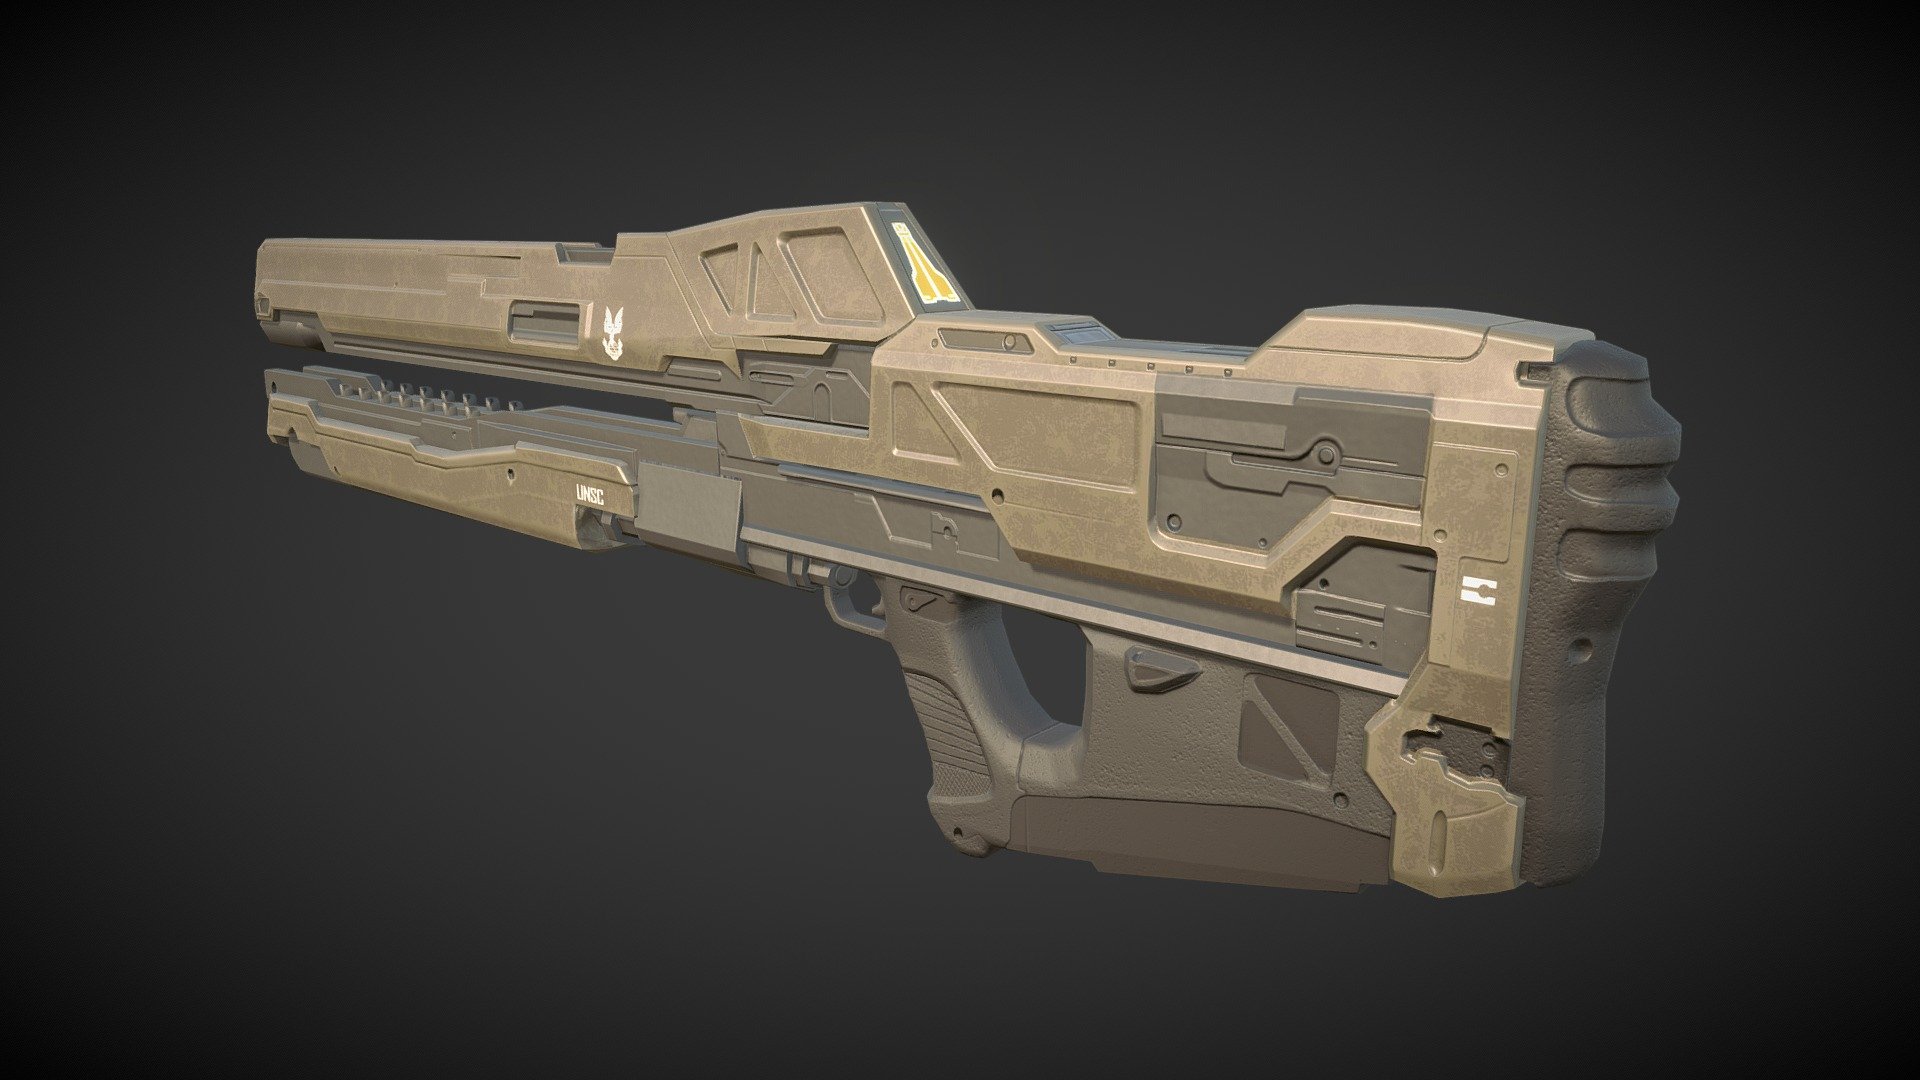 This is a 4987 tri (LOD 0) replica of the Halo Rail Gun modelled in Maya. Both hand painted and smart textures used via Substance Painter along with AO, normal, metallic, roughness and emissive maps. High poly modelled in Zbrush.

Reference:
Rail Gun concept art by “Sparth” of 343. | HaloFanForLife. (2022, September 27). Retrieved from http://halofanforlife.com/?p=7525 - Halo Rail Gun Replica - Download Free 3D model by CaesarSypha 3d model